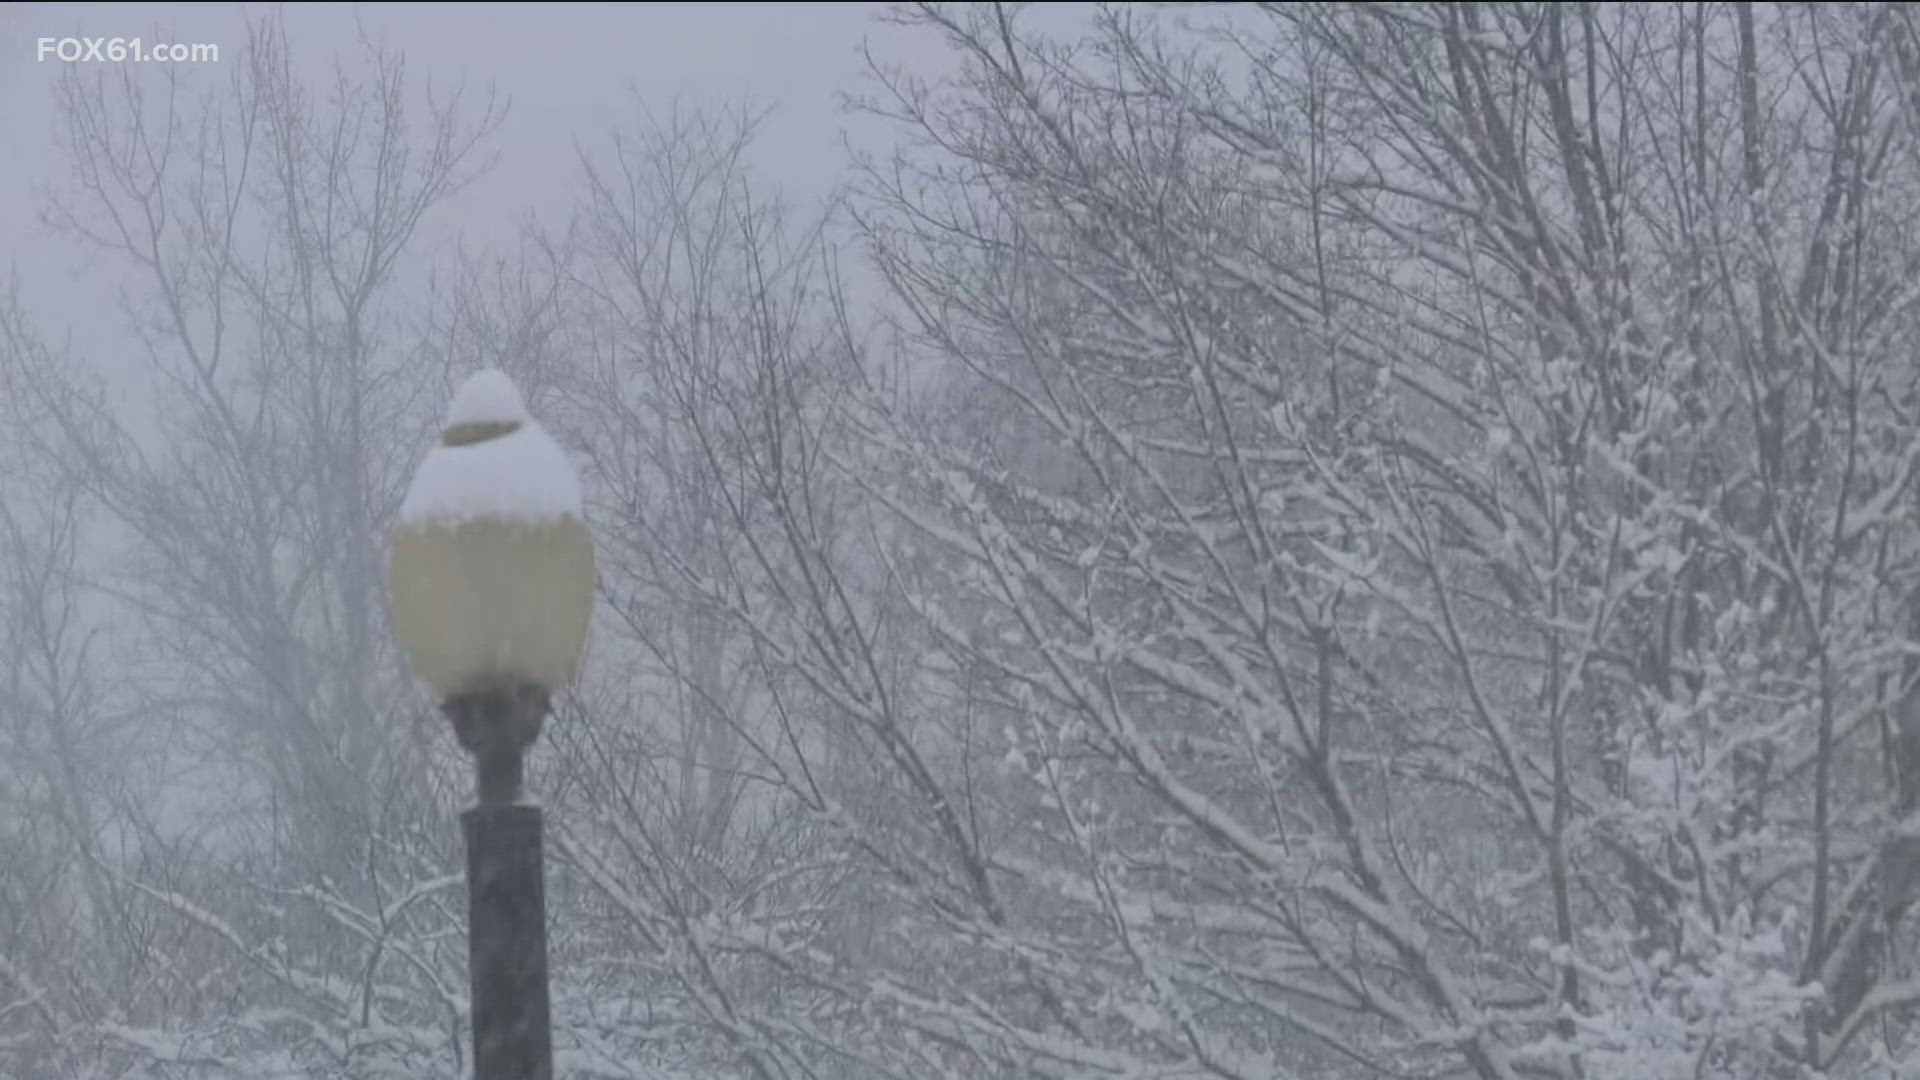 The snowfall continues in Meriden as heavy snow falls all over Connecticut on Tuesday morning.